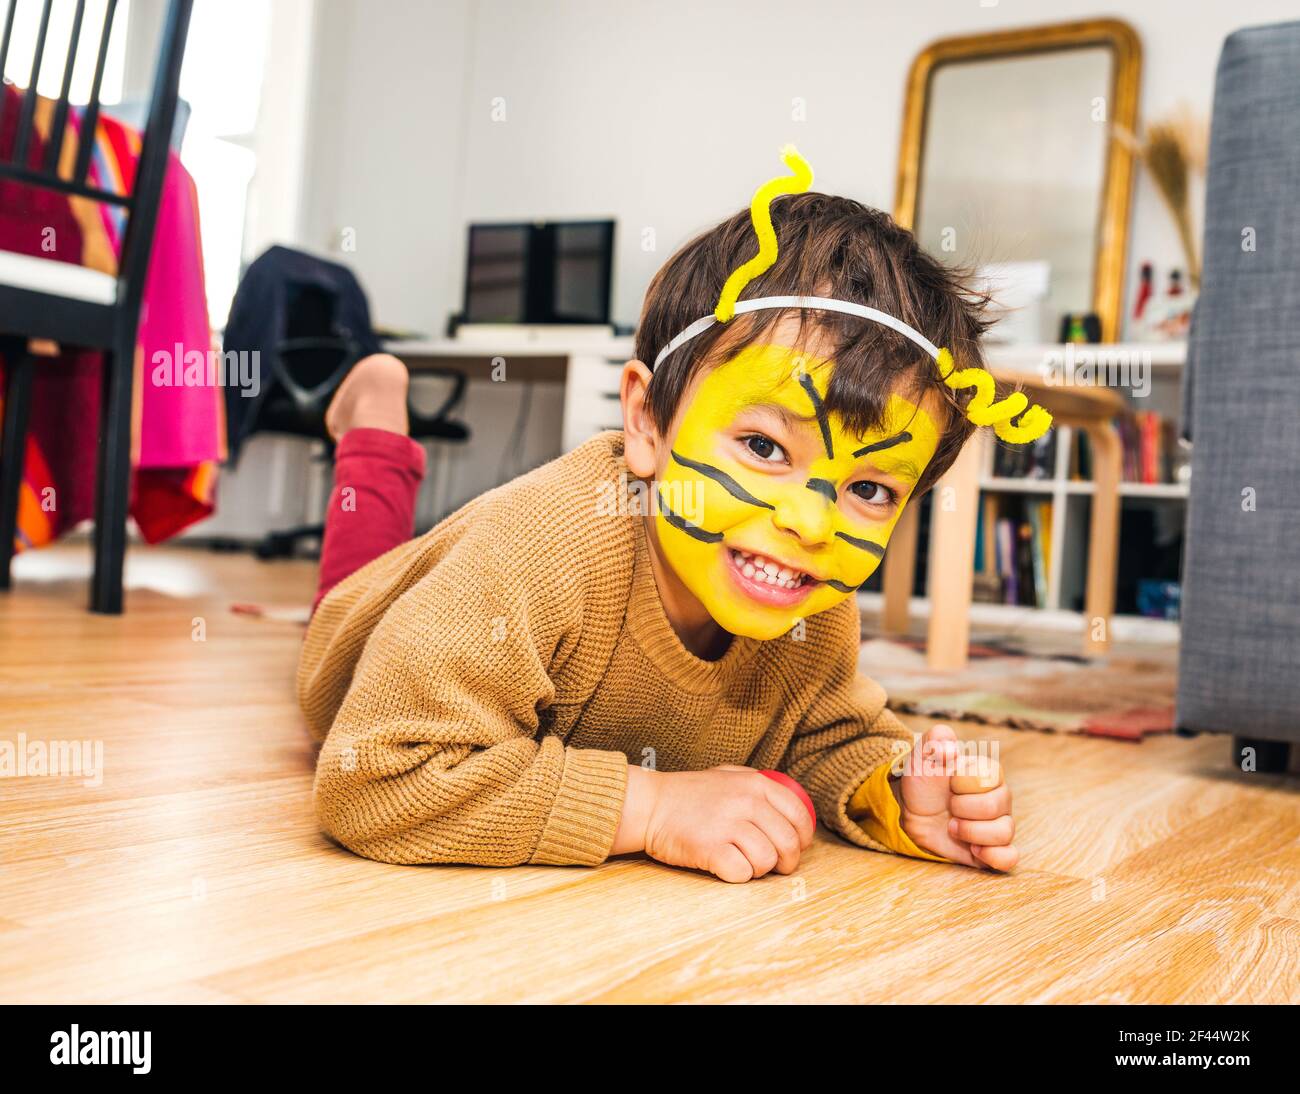 Little boy with bee face paint Stock Photo